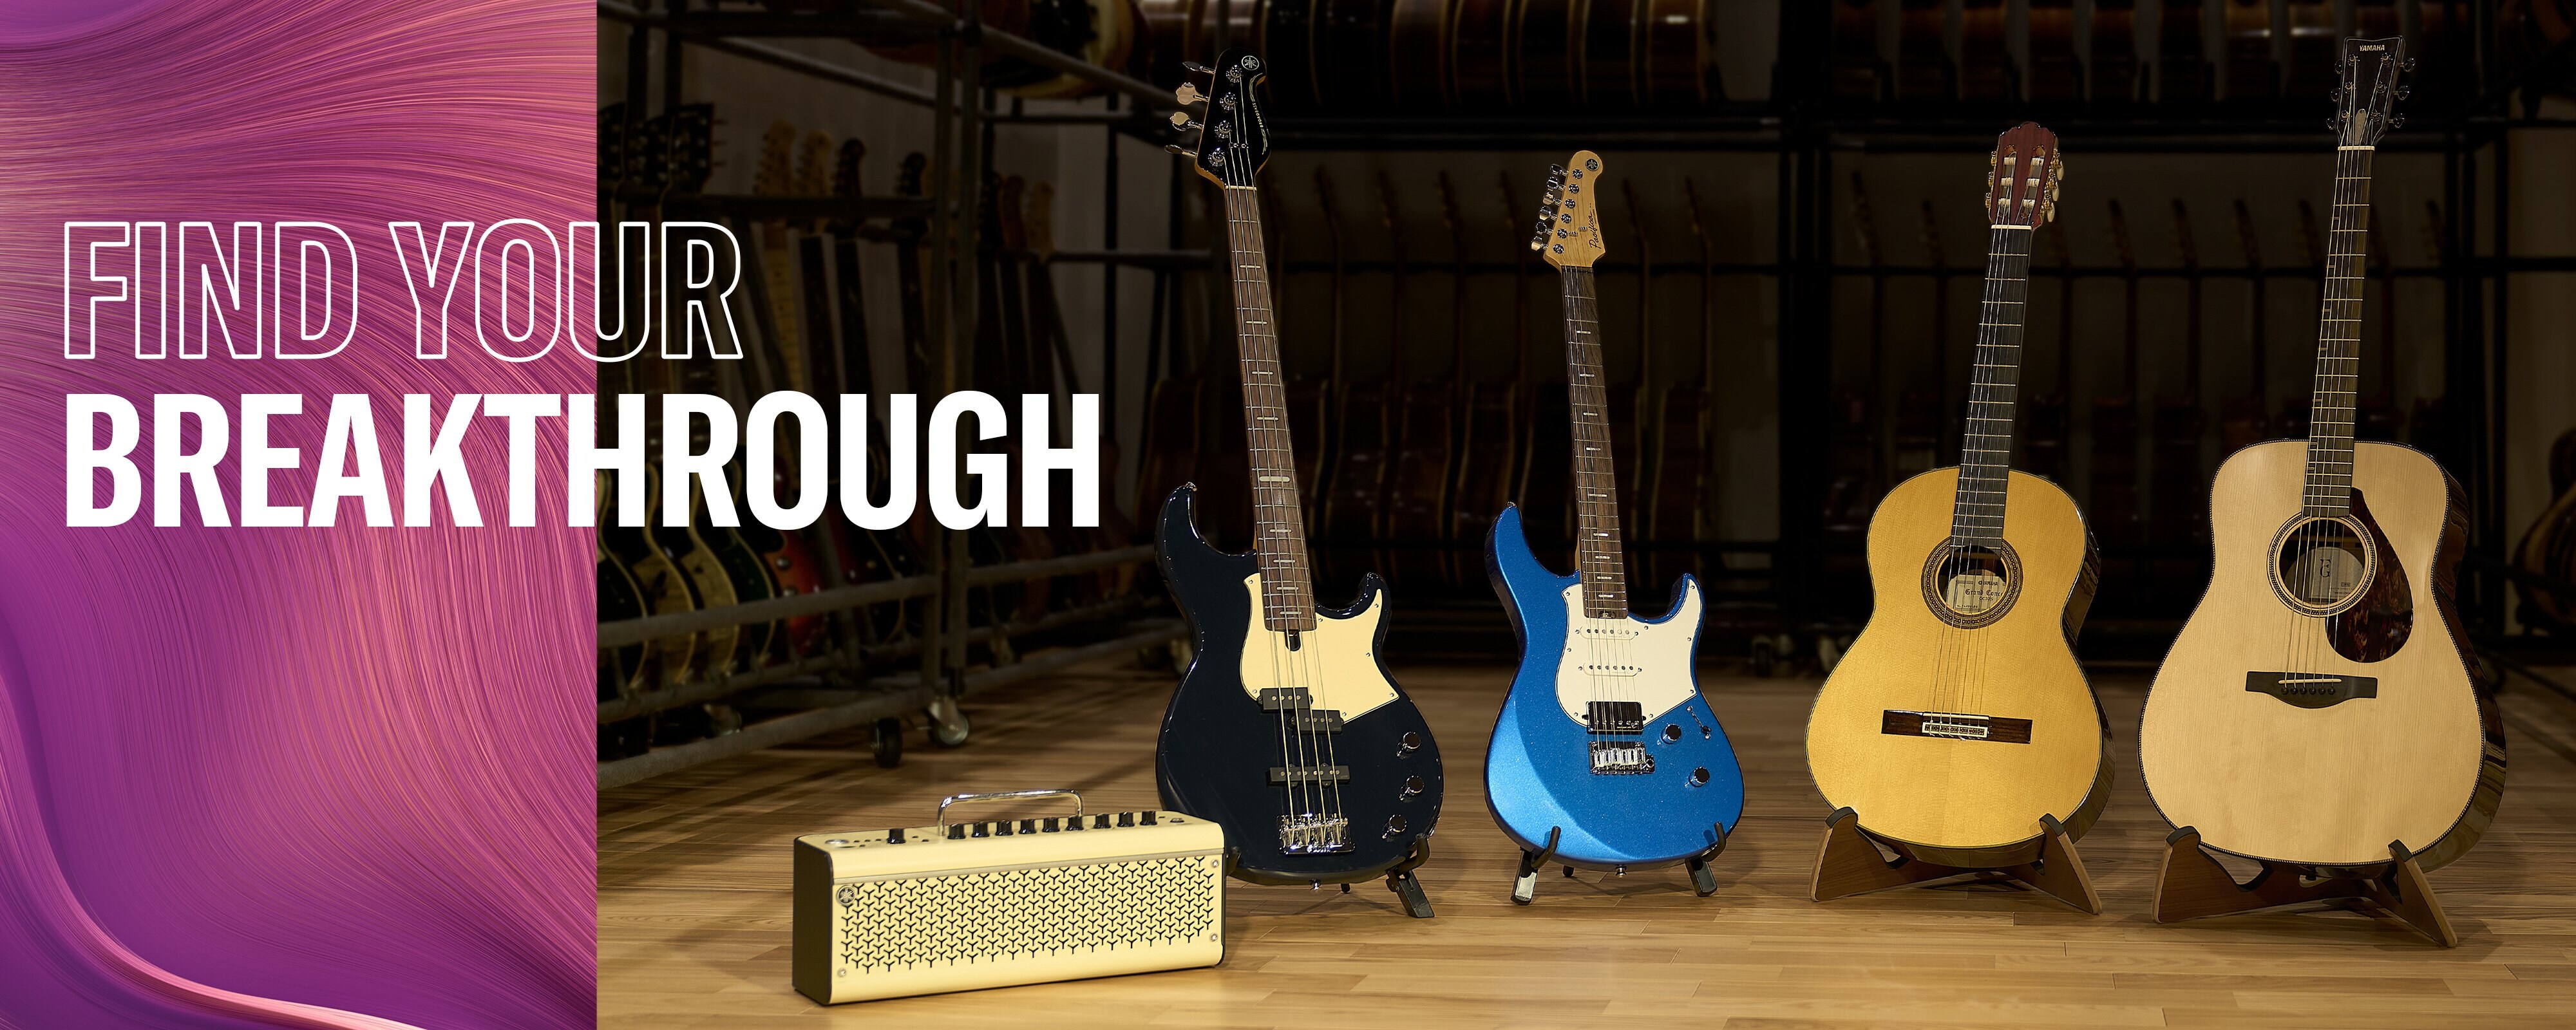 Background is a rack full of guitars. 5 products are placed in the center. From the left is THR30II, BBP34 Midnight blue, PACIFICA Professional Sparkle Blue (Rosewood), GC32S, FG9R.